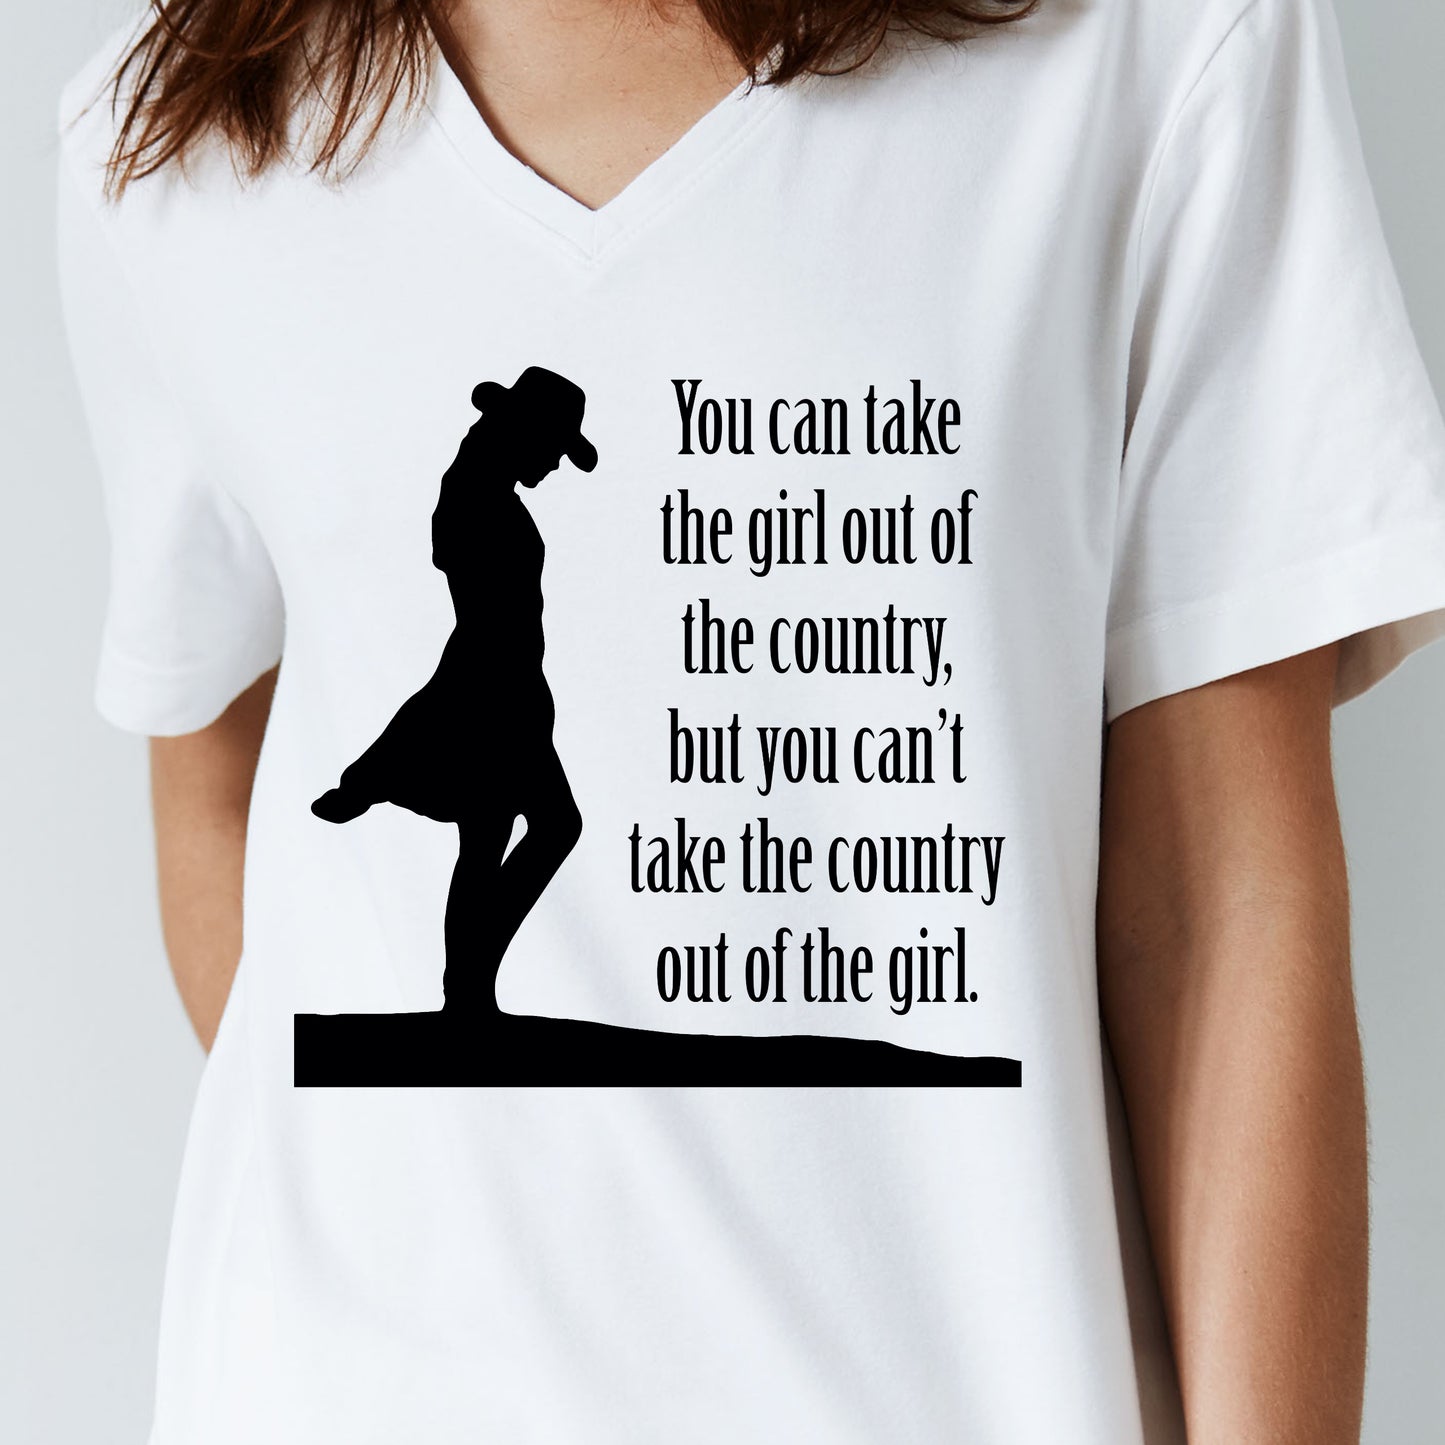 Country Girl T-Shirt For Woman TShirt Western T Shirt For Feminine T-Shirt For Cowgirl Shirt For Rodeo TShirt For Country Girl Gift